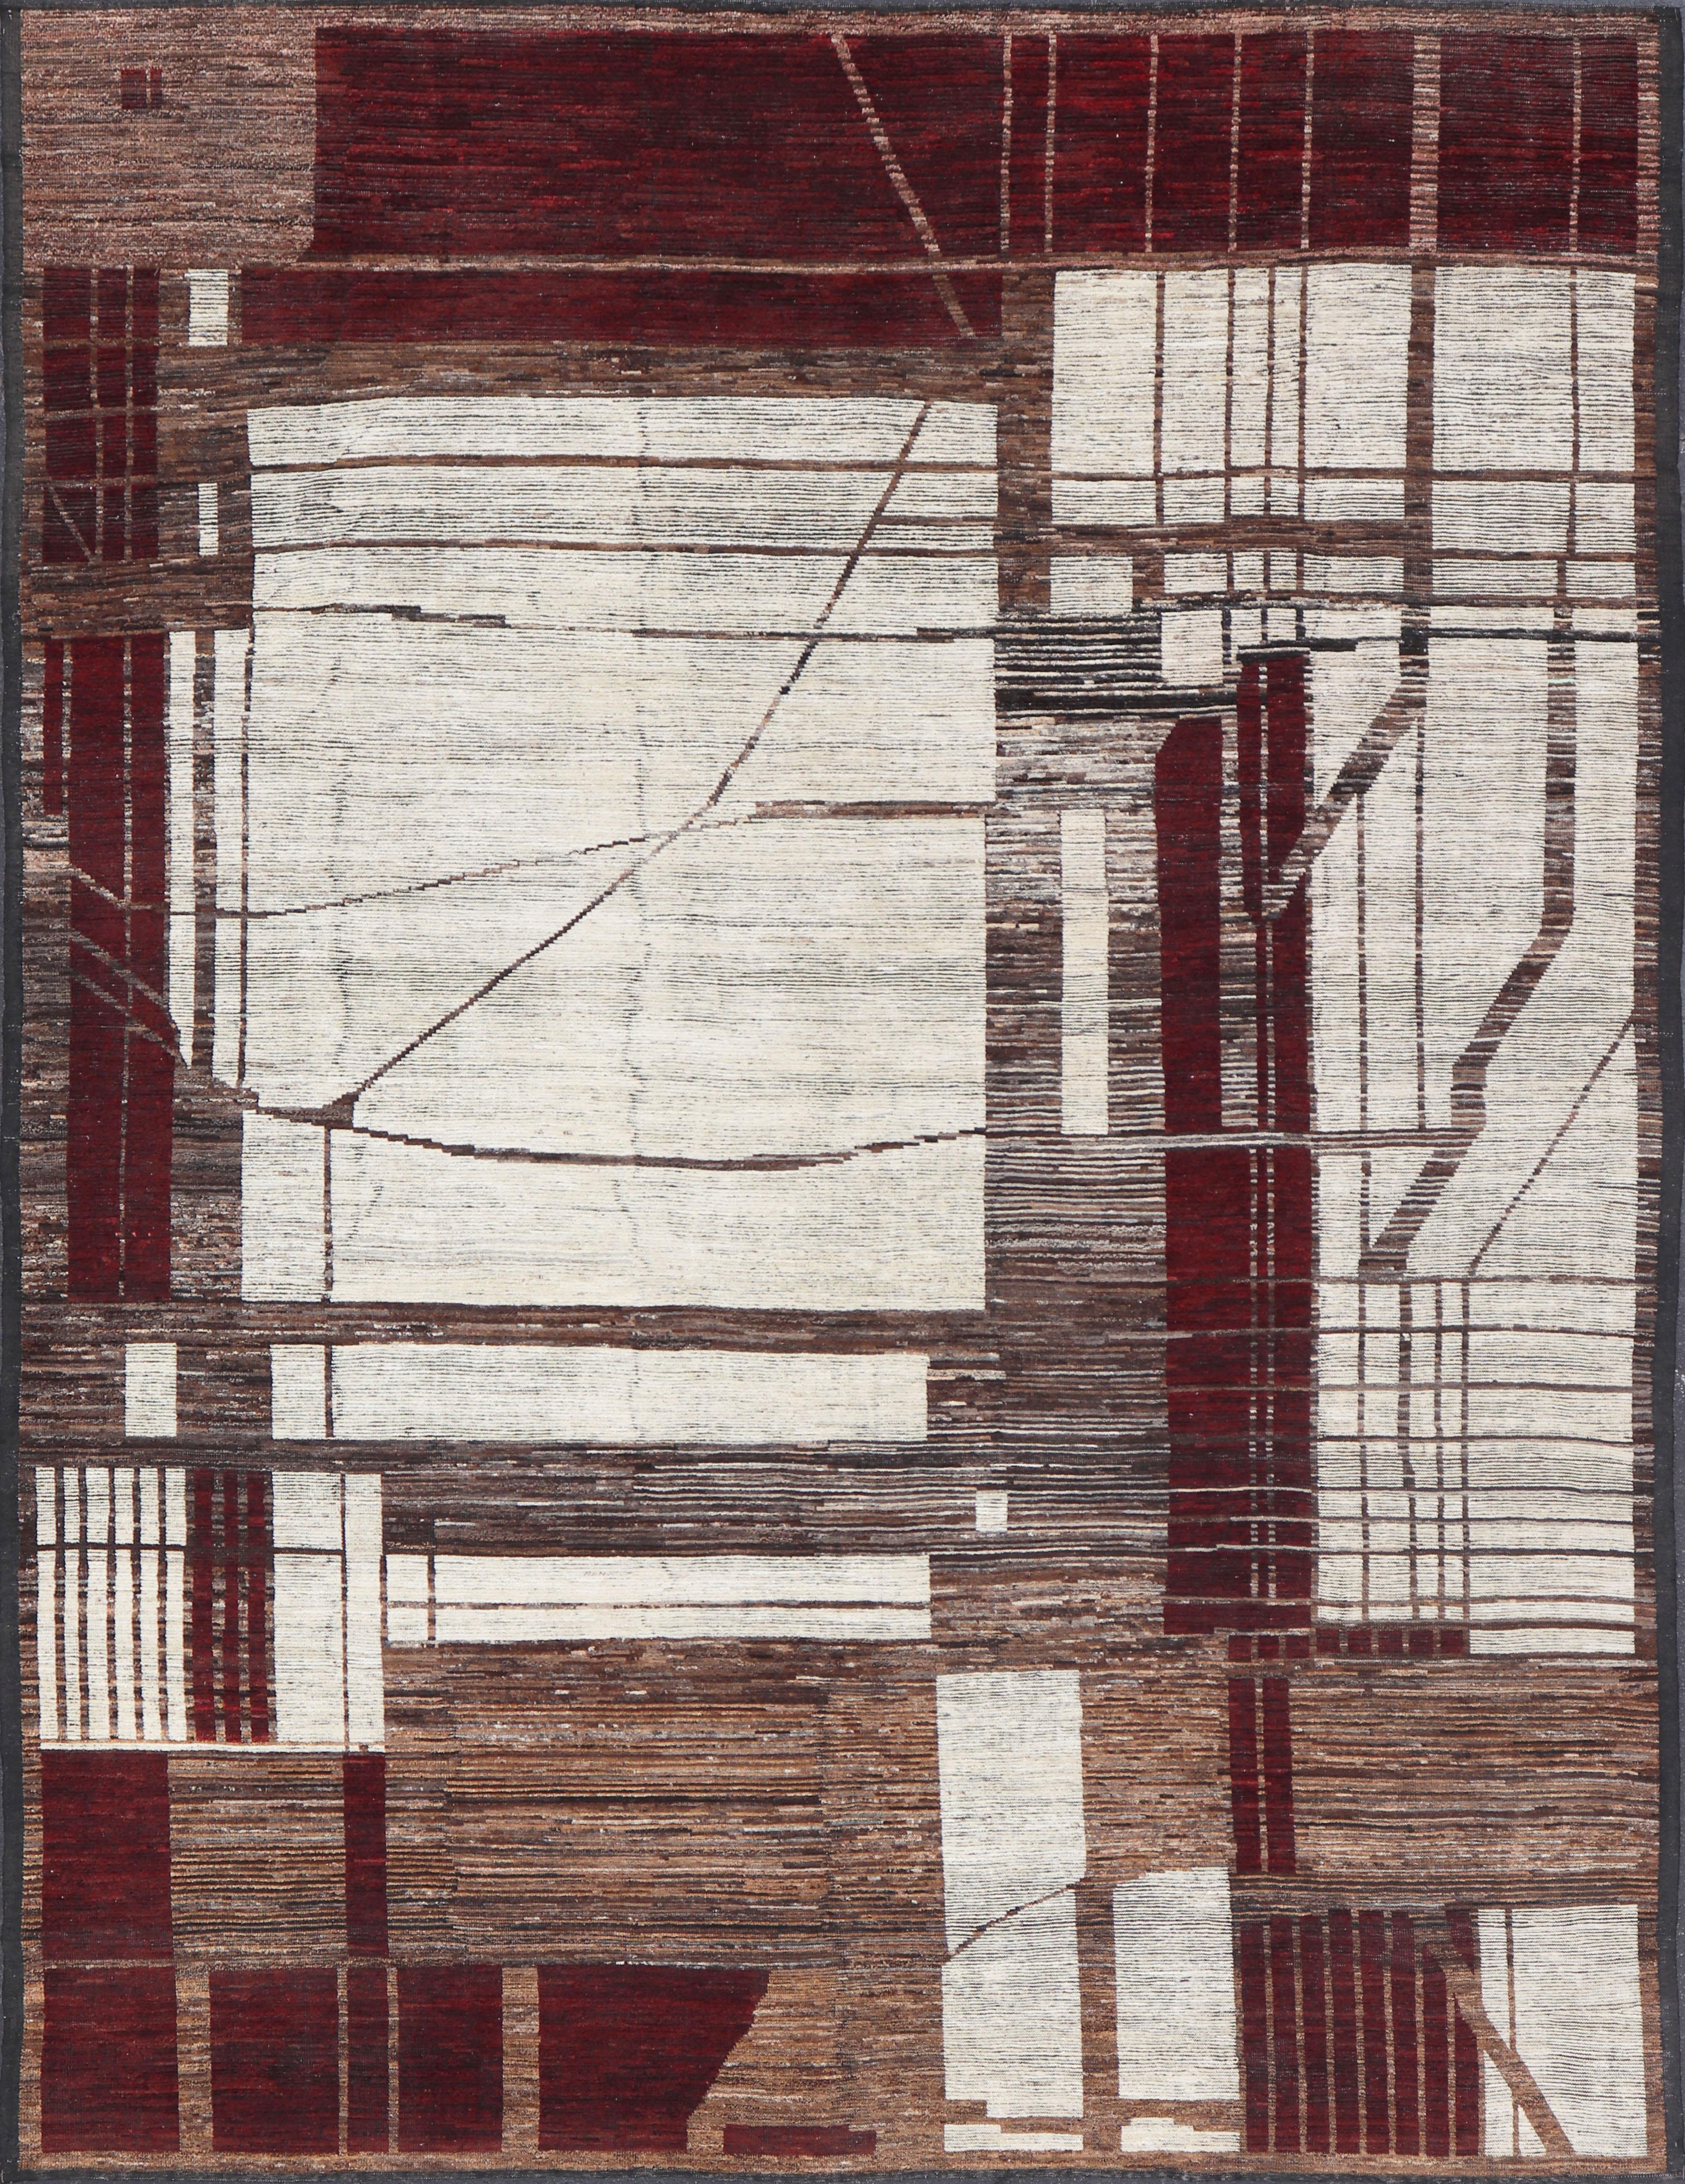 This large modern casual palace rug features an abstract sub-geometric design rendered in maroon, gray, bronze color and ivory. This modern marvel displays very complimentary colors, making this a beautiful addition to a number of